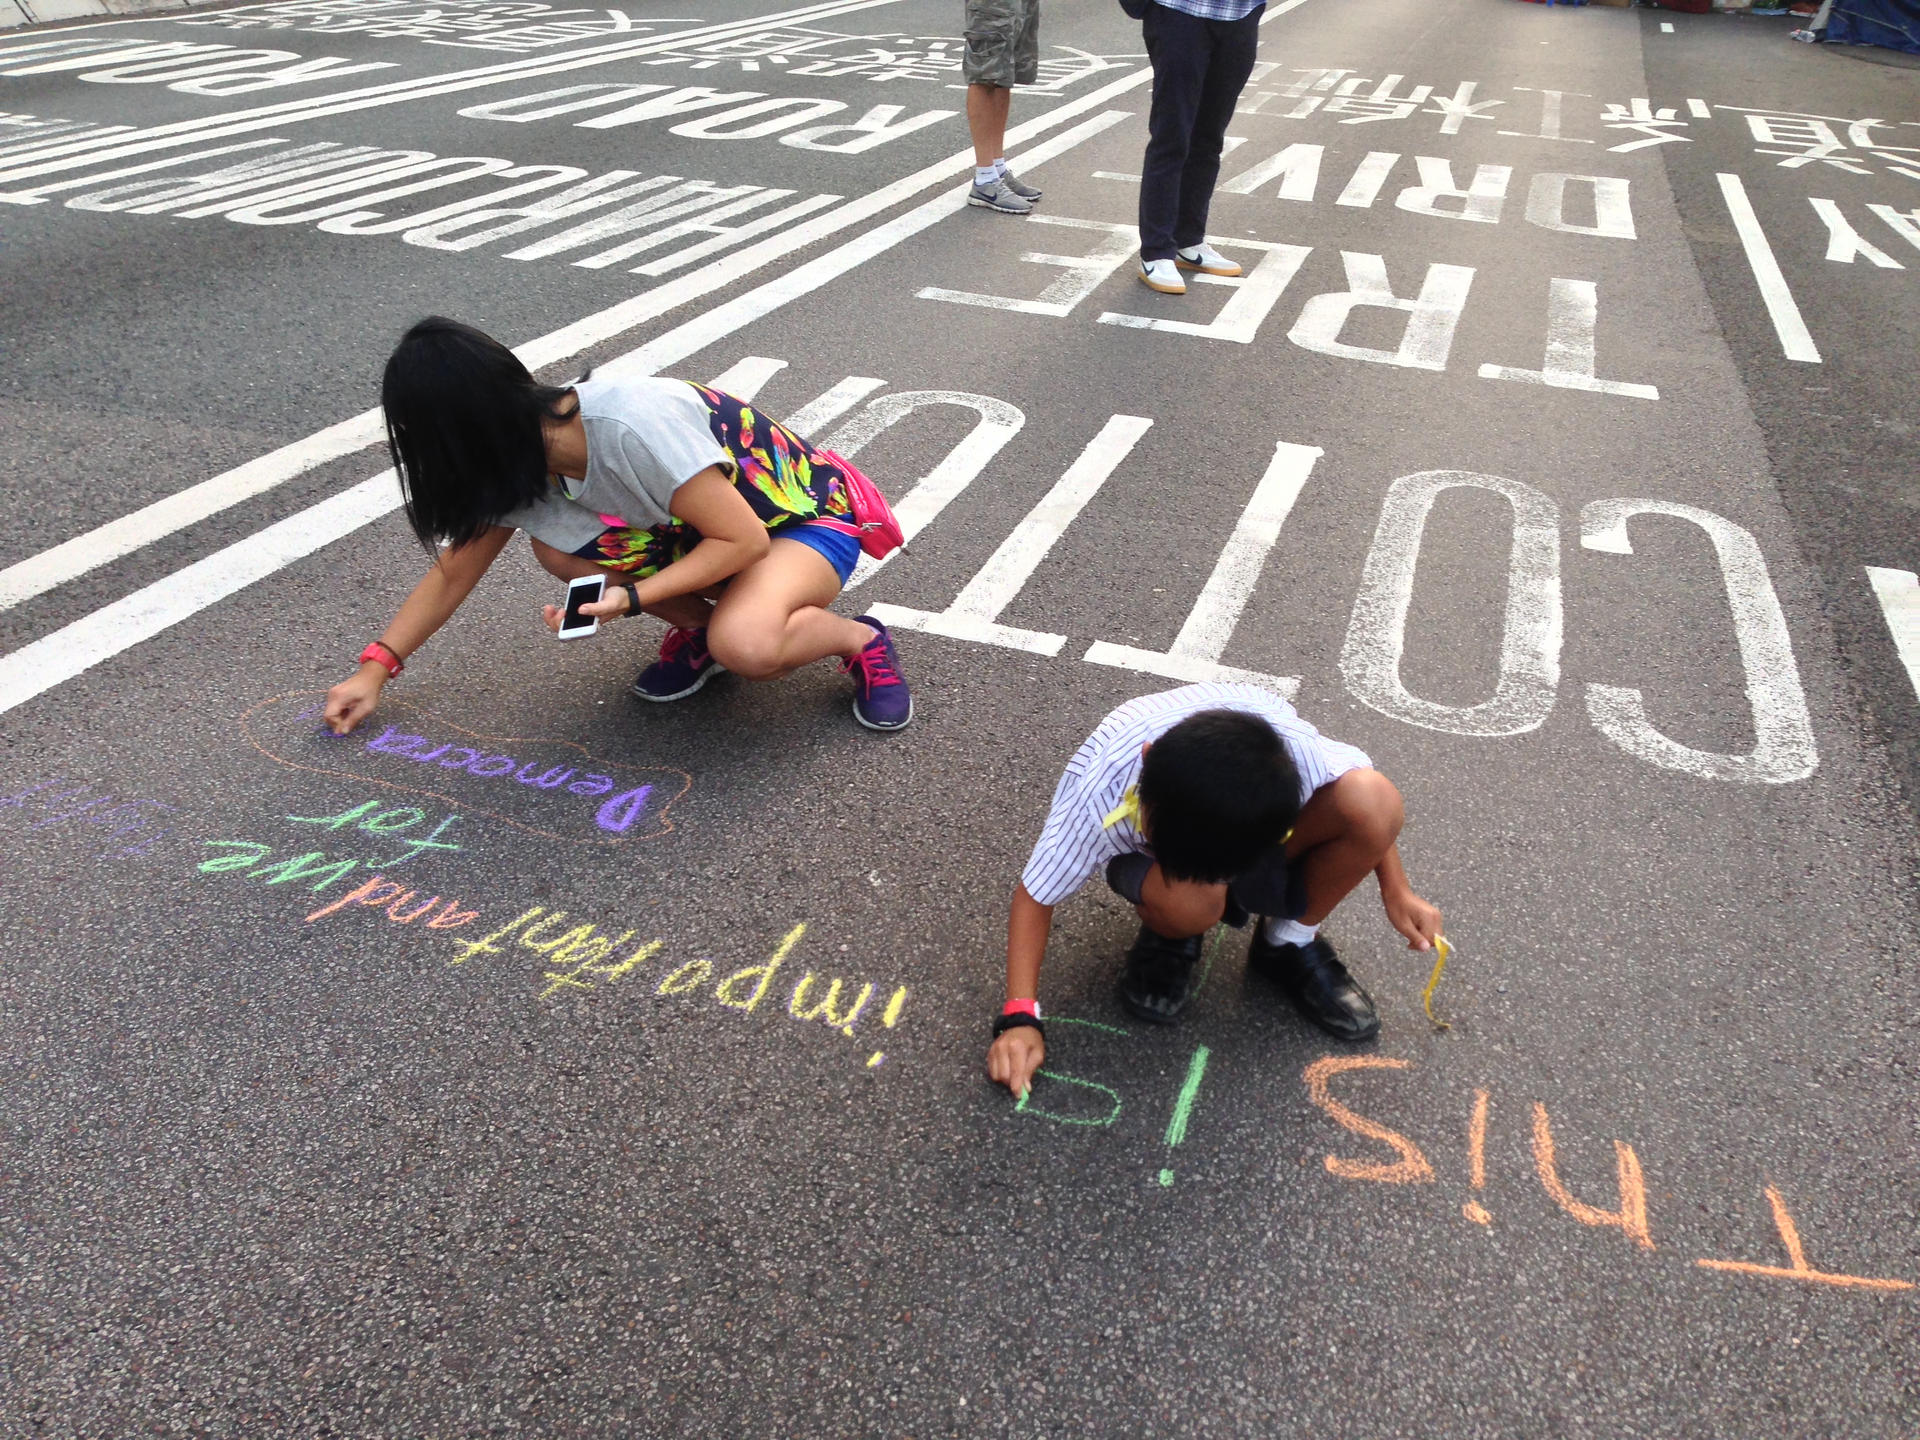 Students involved in a mobile democracy class write with chalk on the road during the Occupy protests.